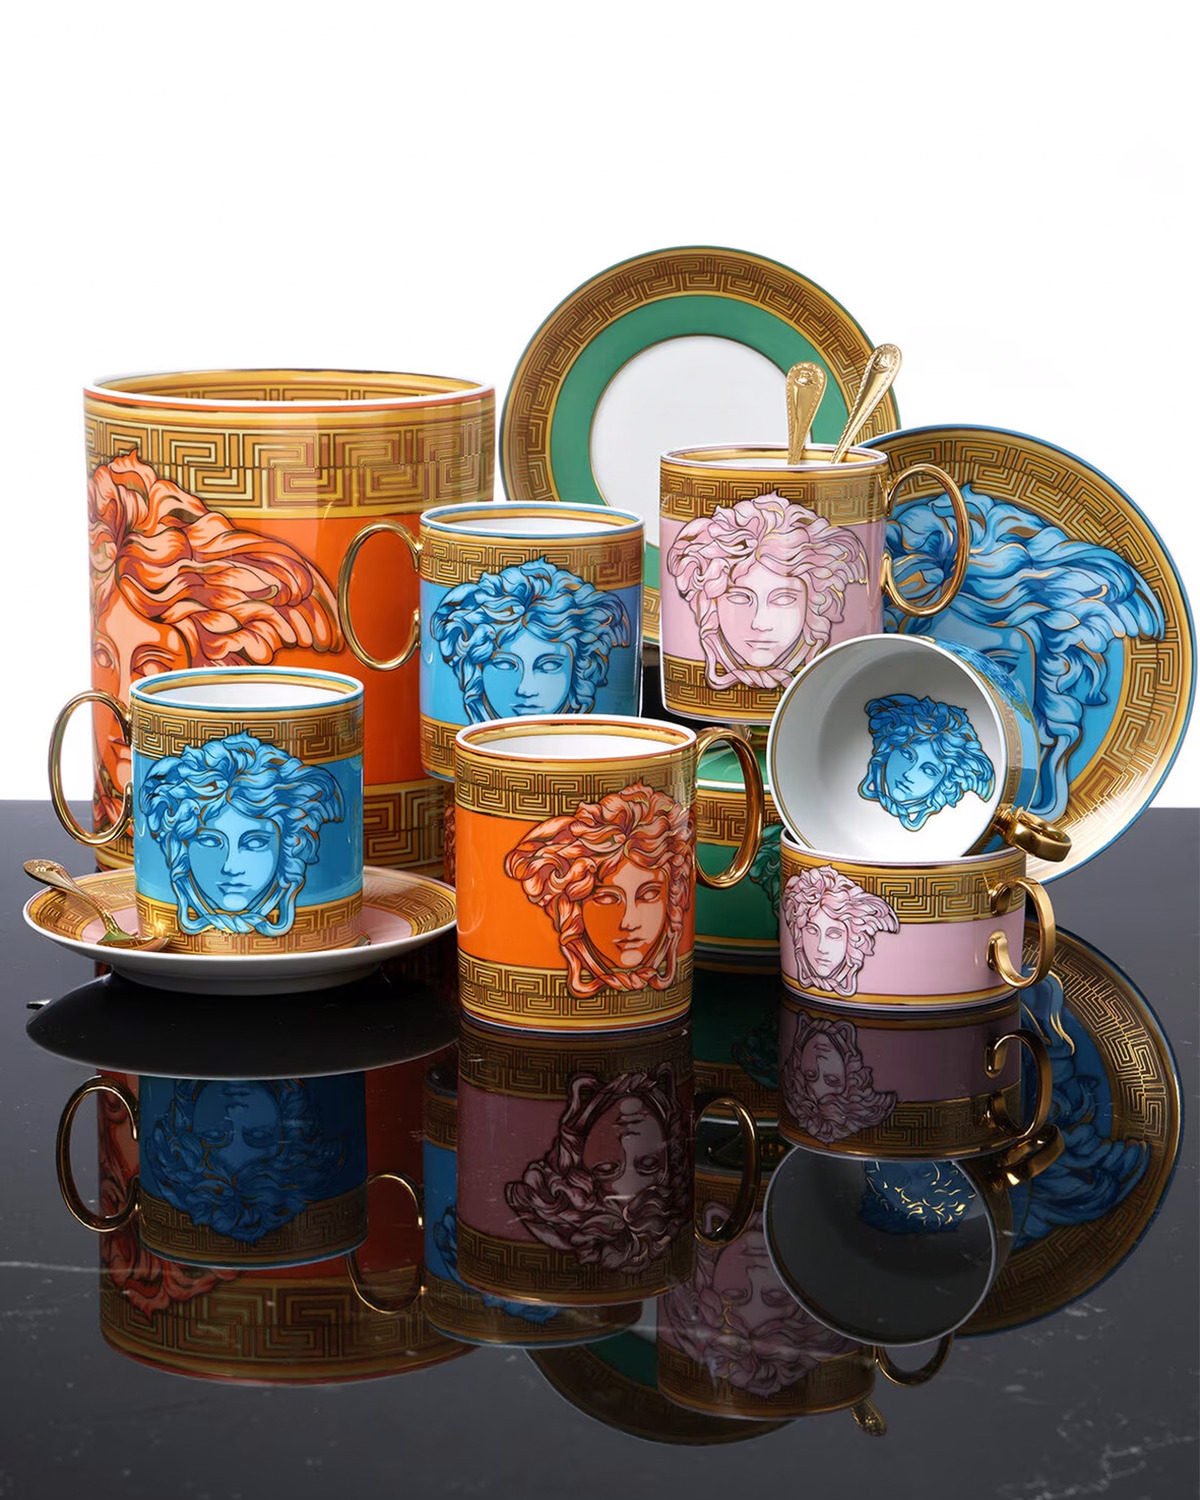 Take a sip to remember with mugs and tableware from Versace Home. Photos: Handout